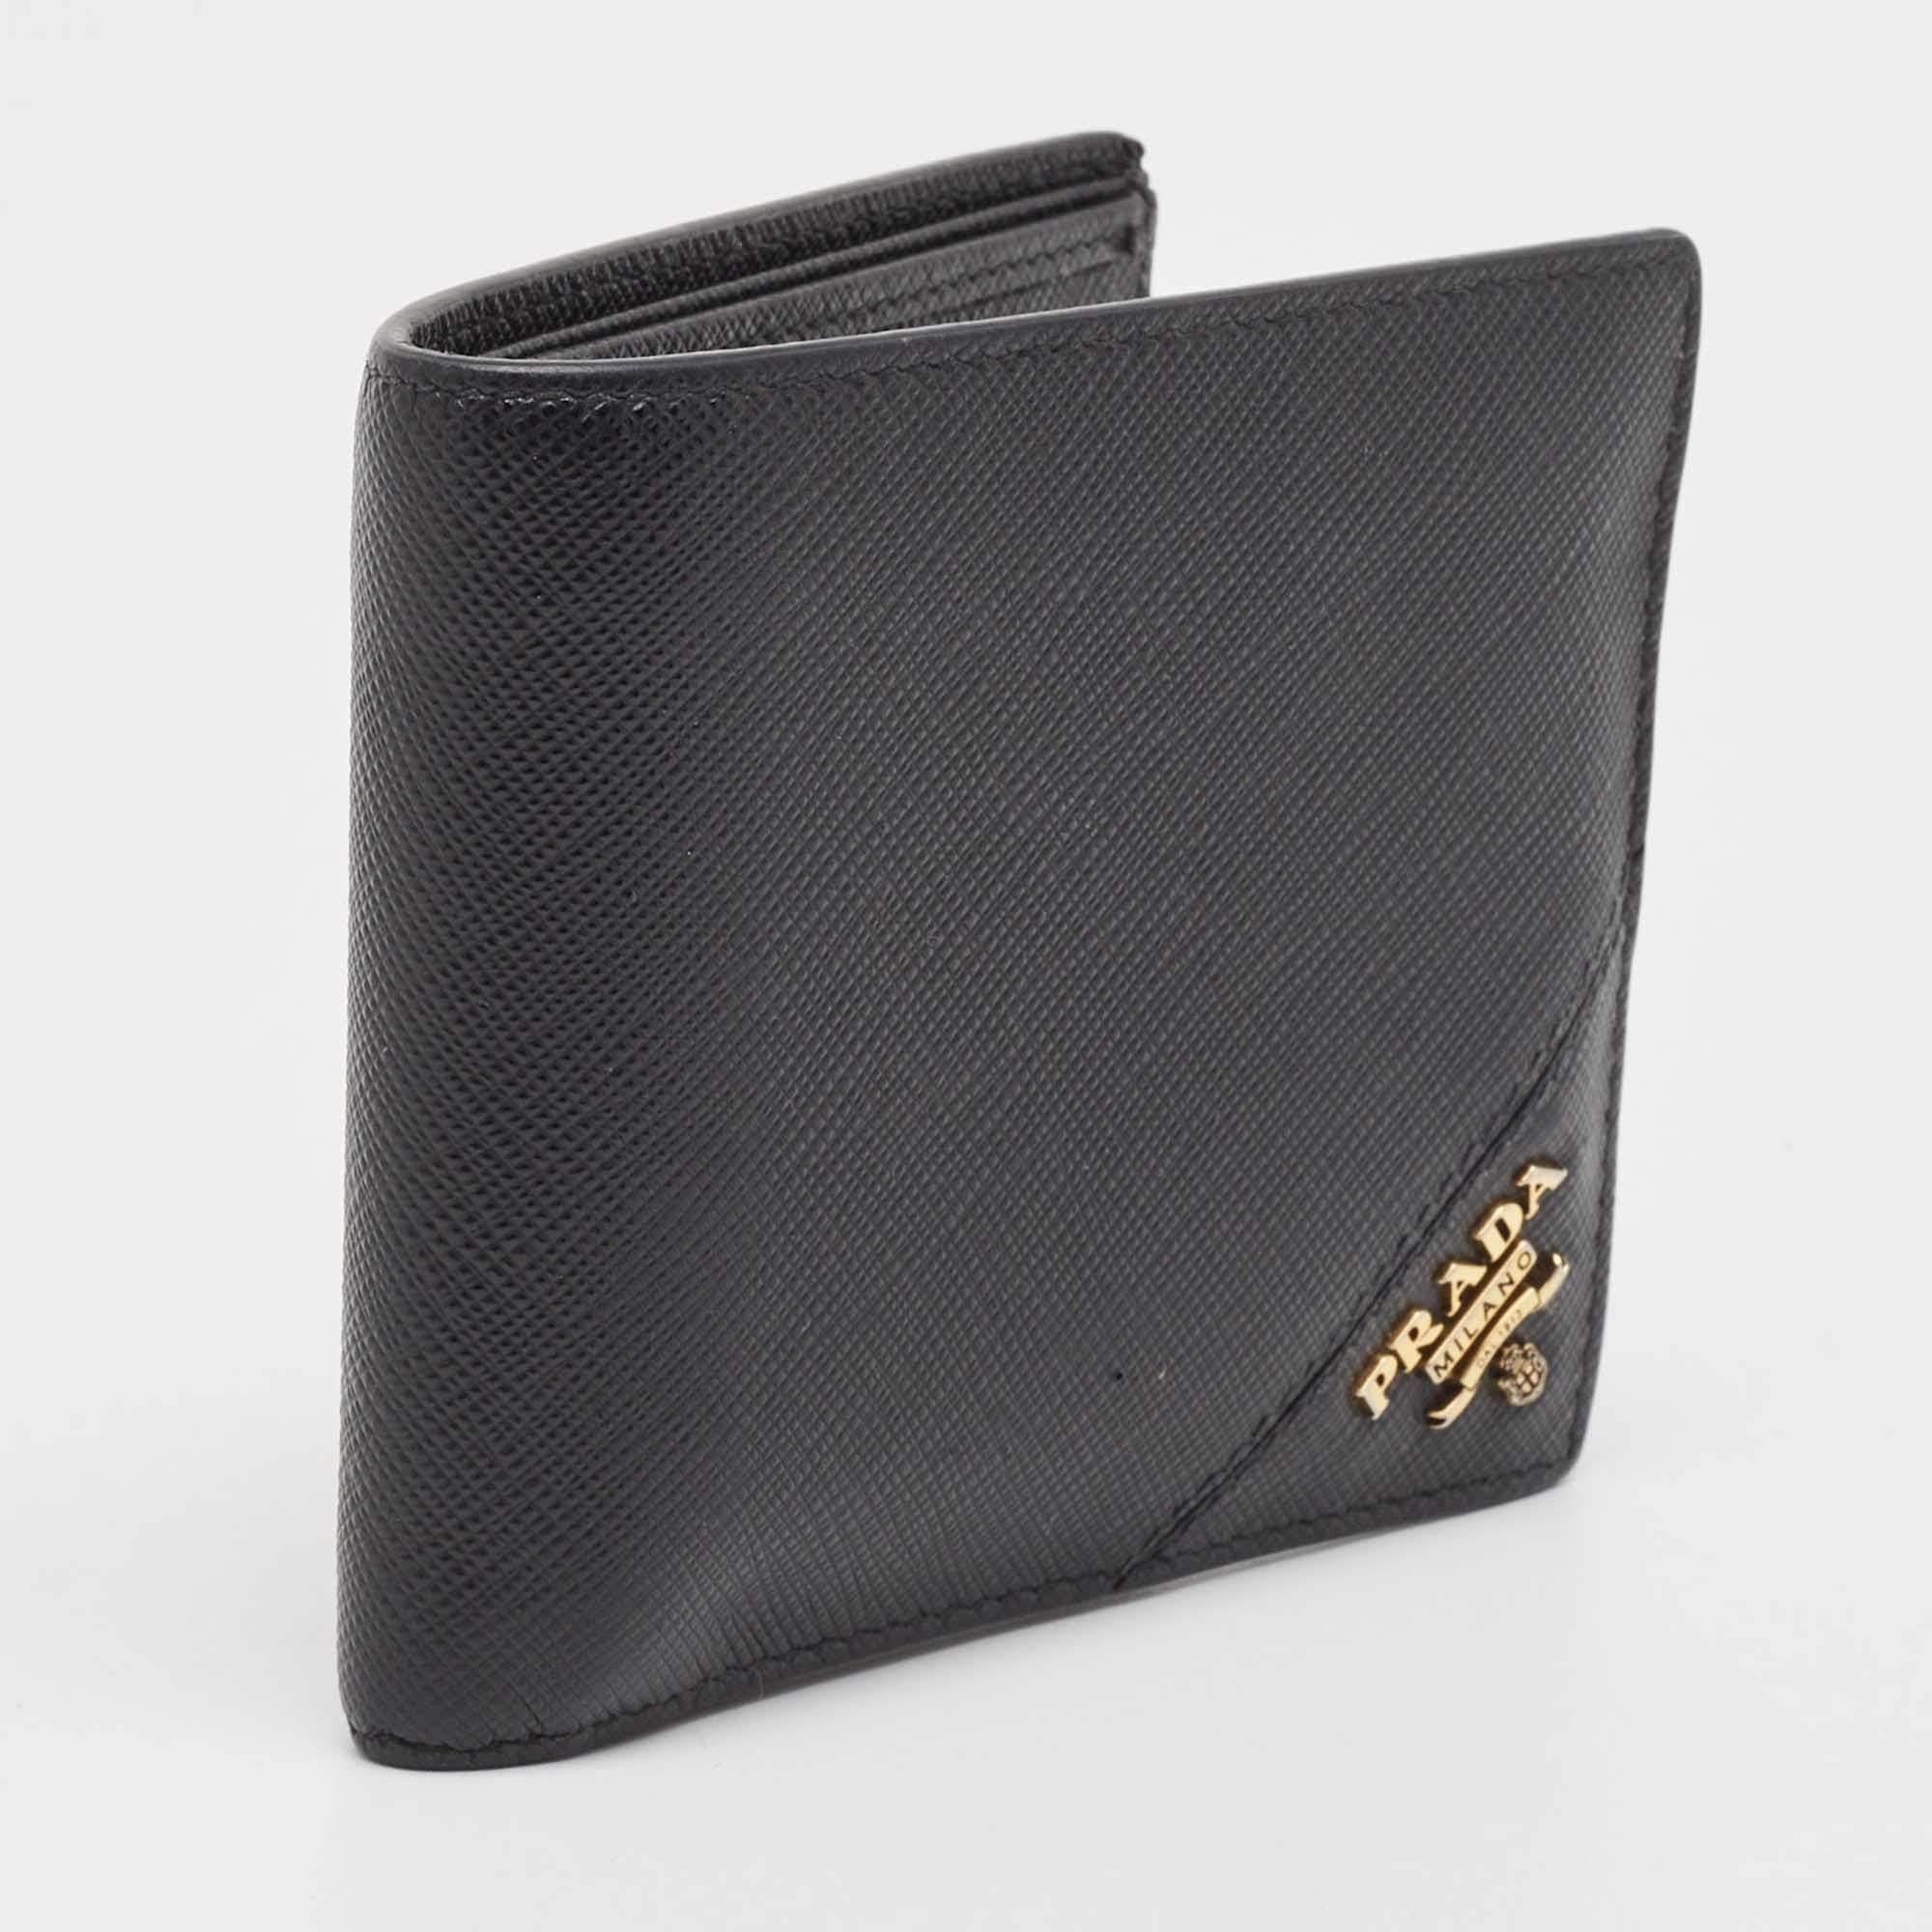 This classy Prada wallet for men brings along a touch of luxury and immense style. It comes perfectly crafted to neatly carry your cards and cash.

